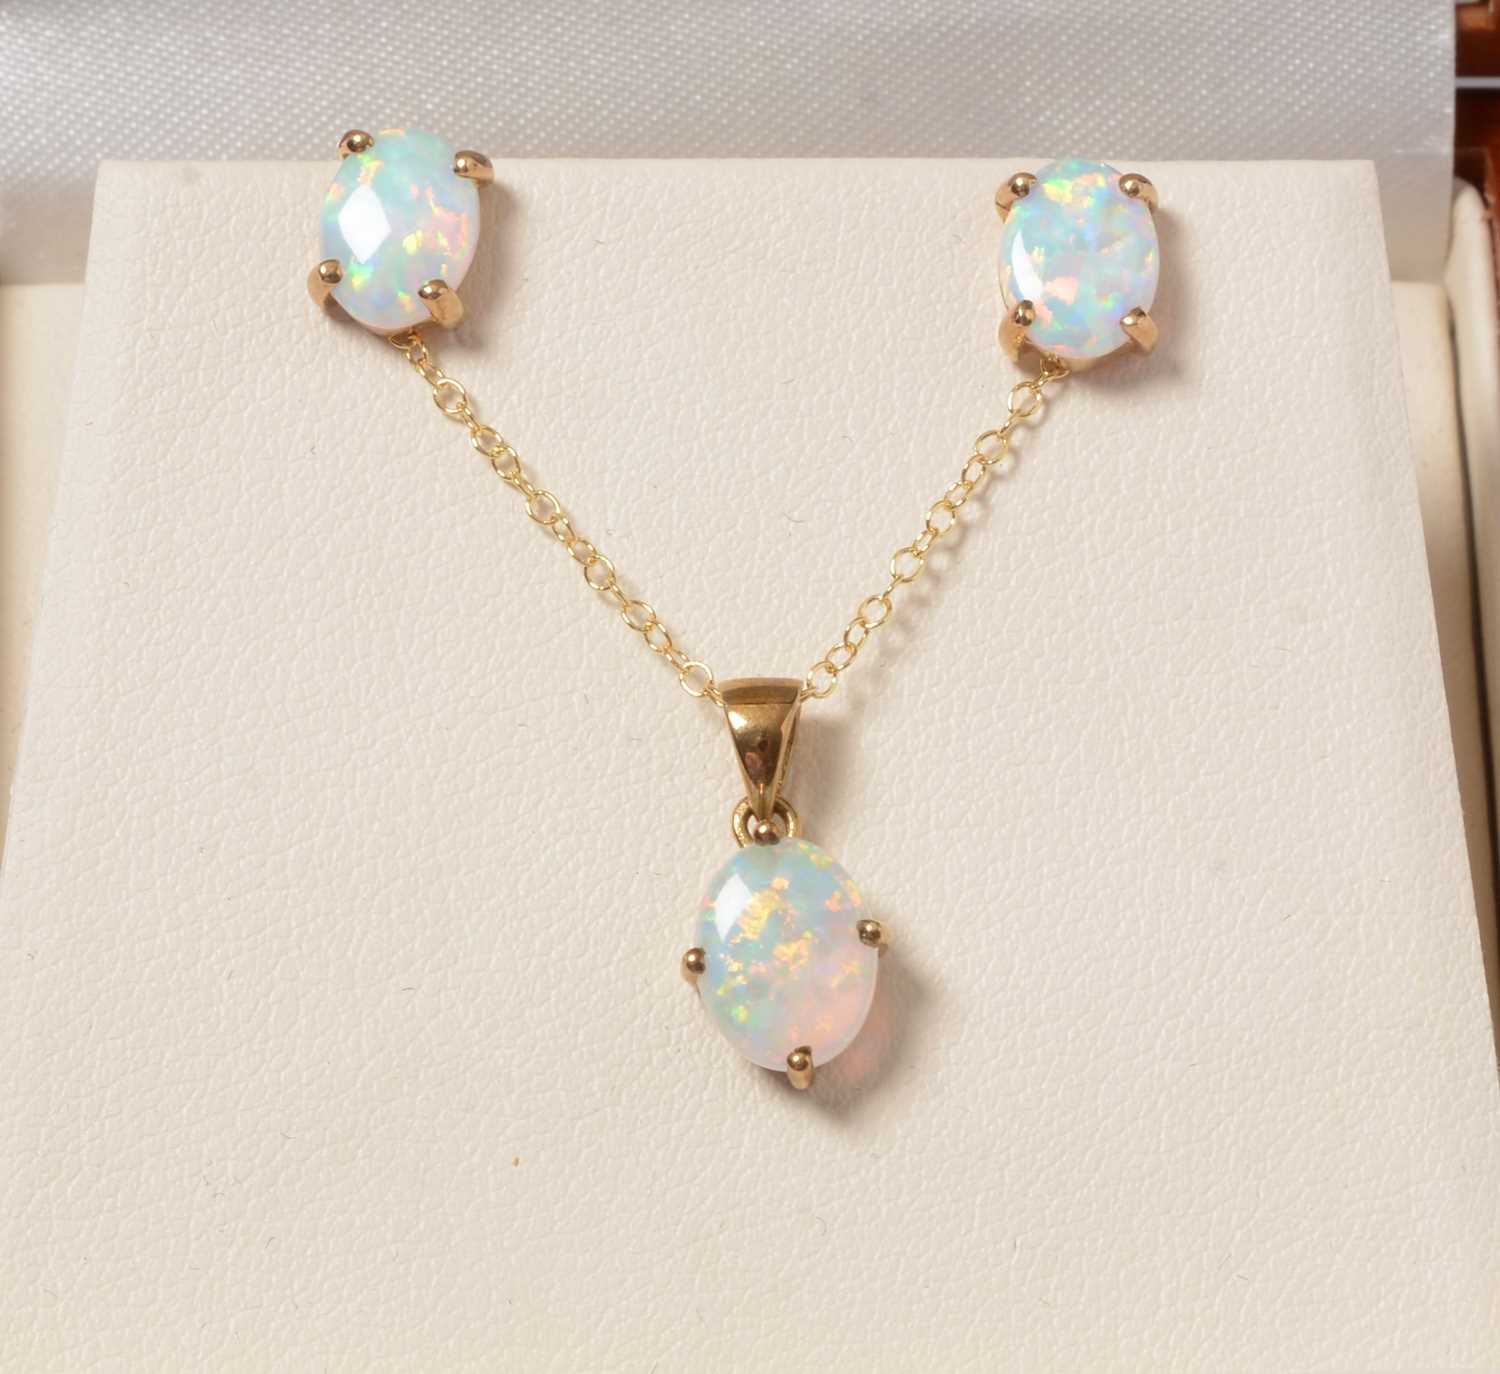 Lot 257 - An opal pendant necklace and earring set